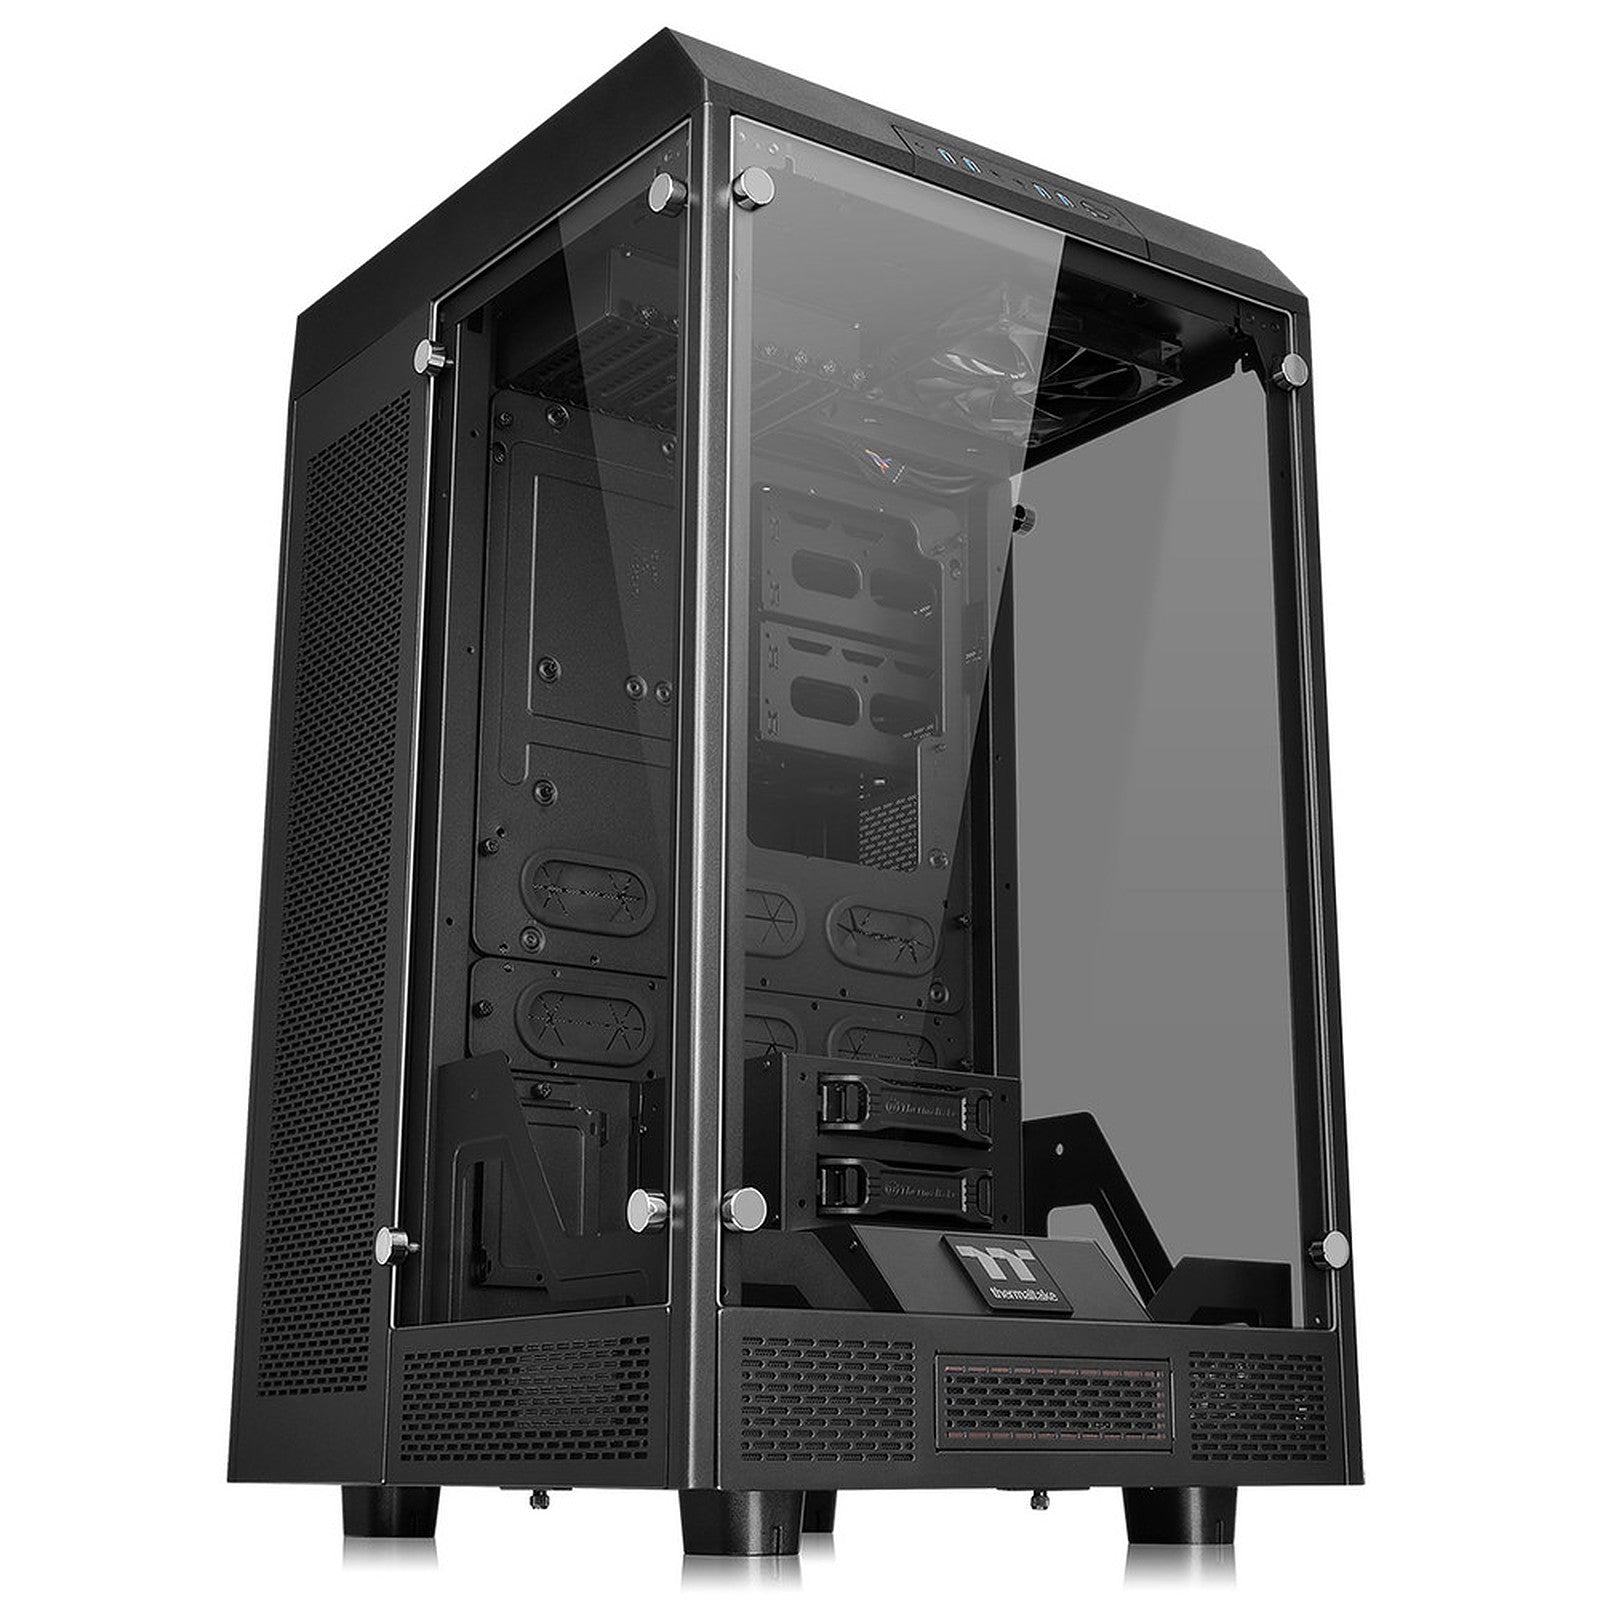 BOITIER THERMALTAKE THE TOWER 900 TG BLACK